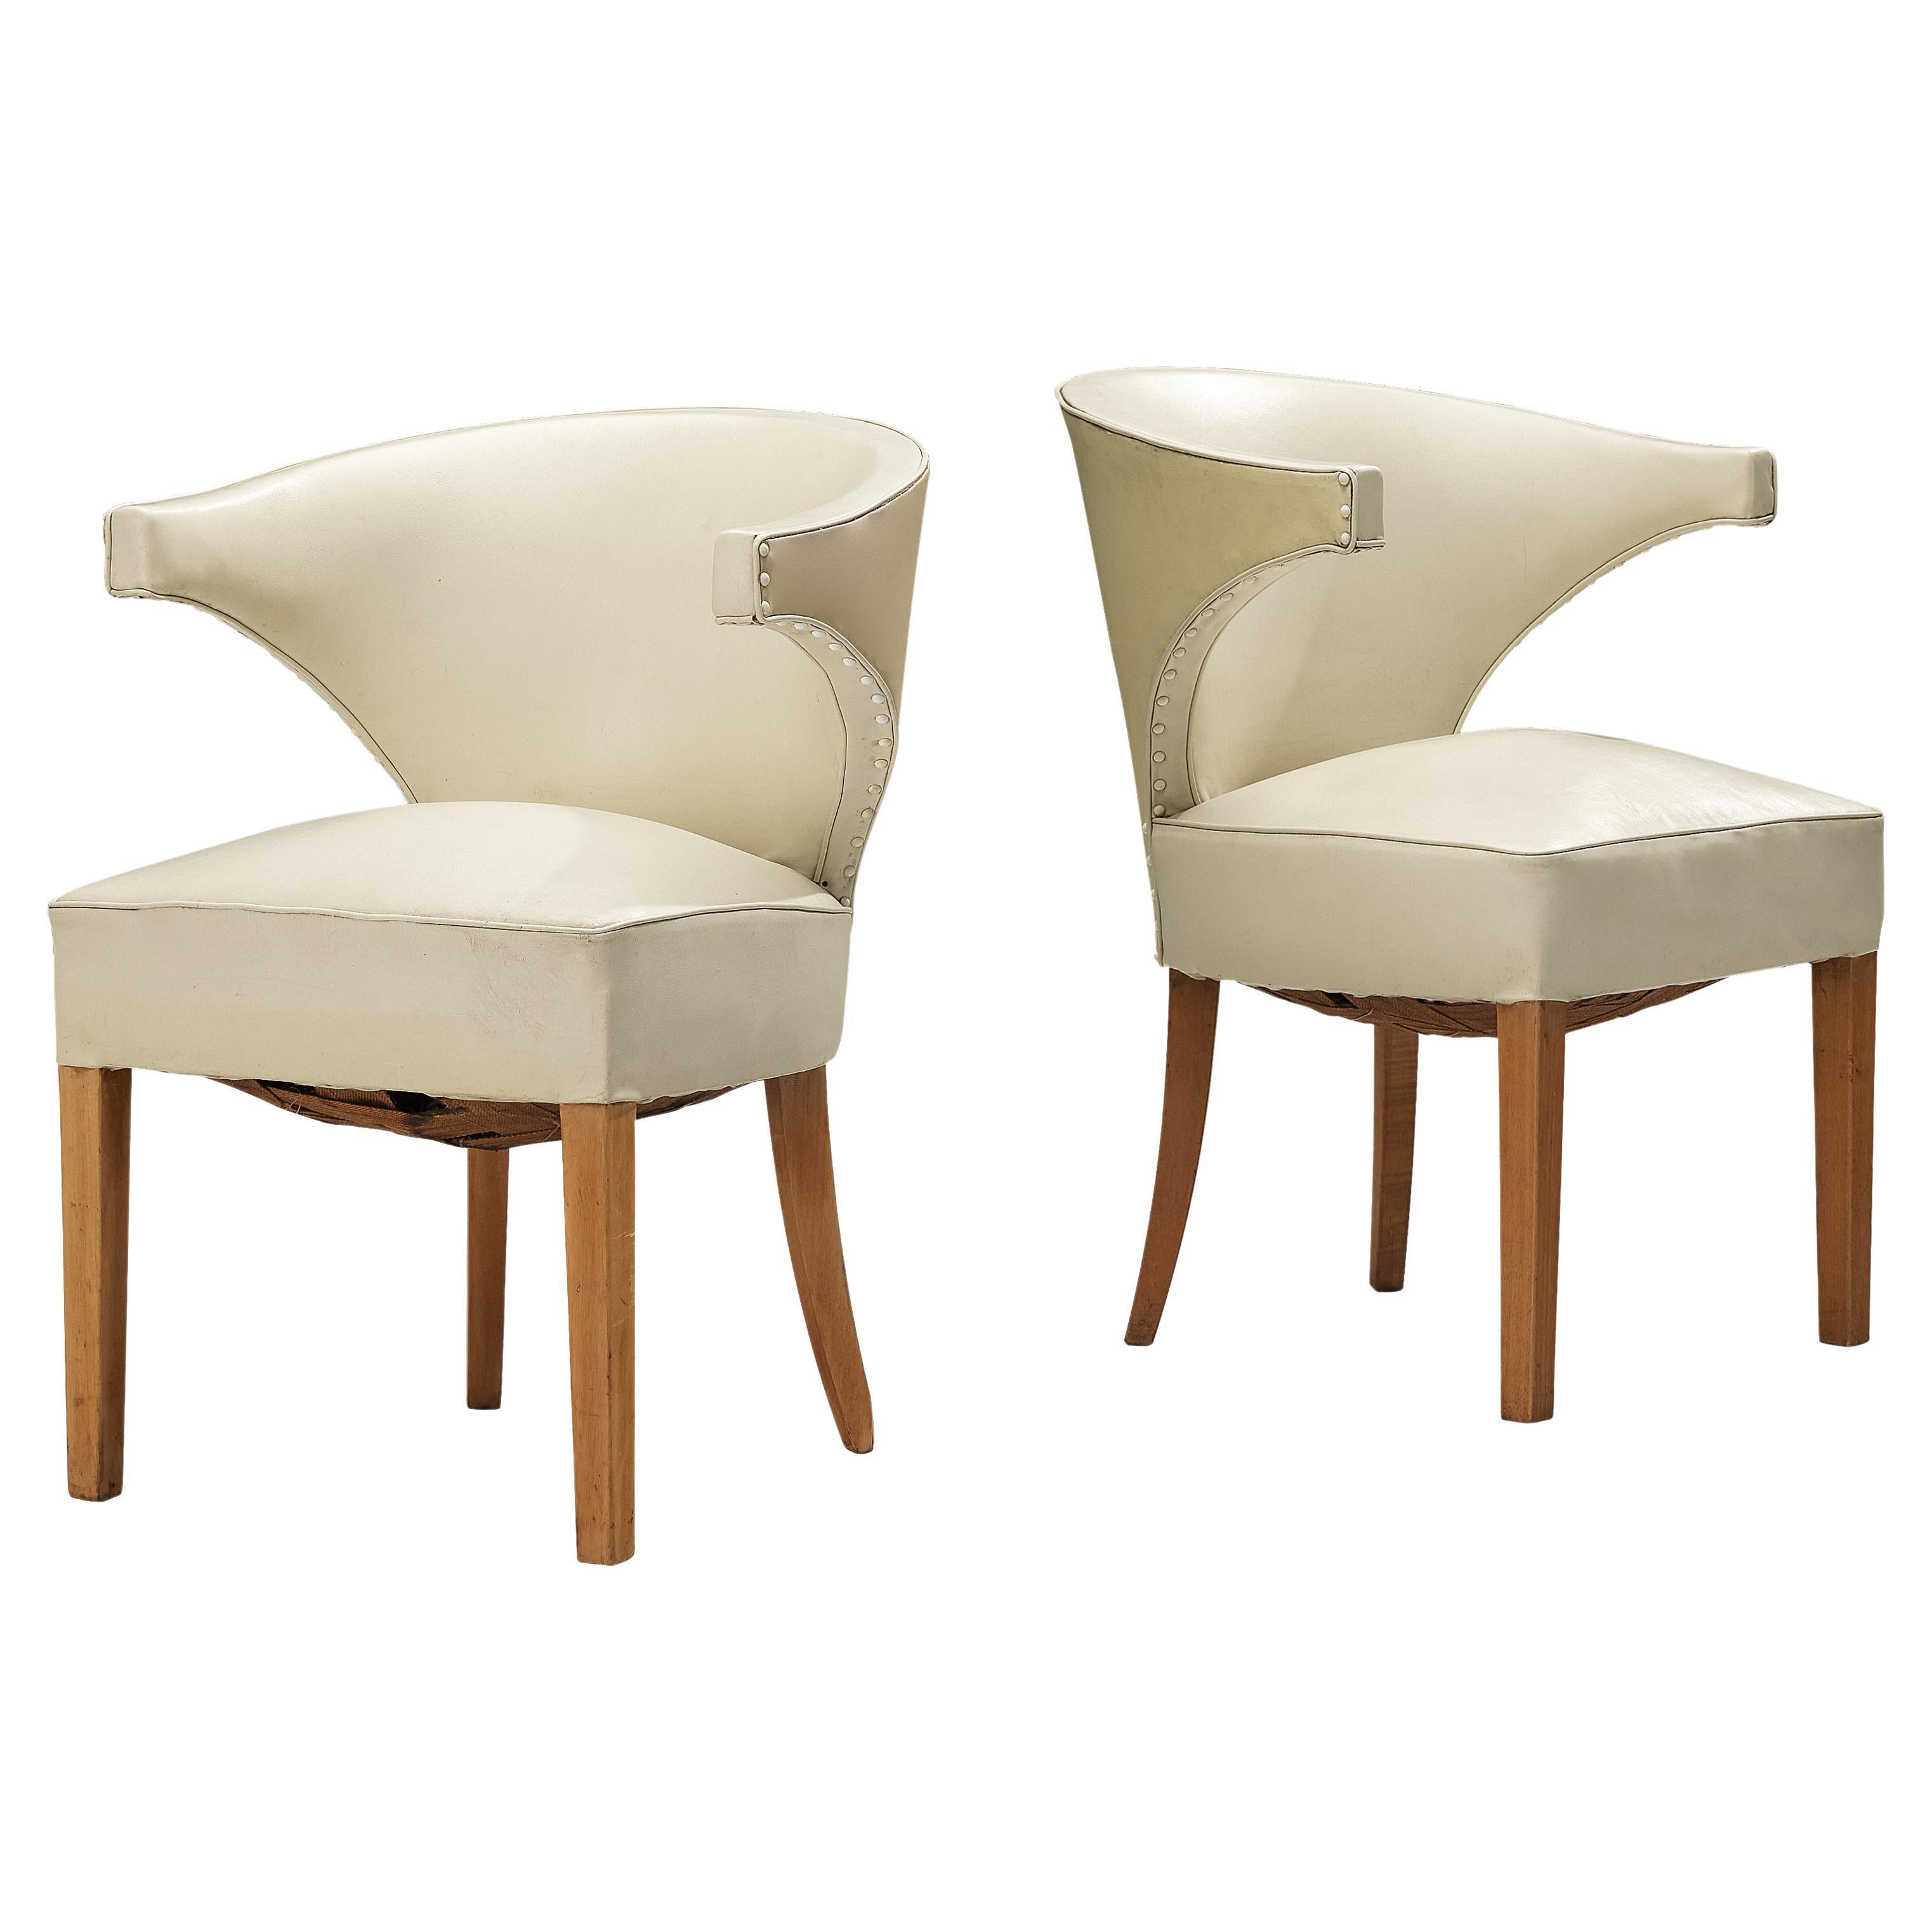 Pair of Danish Lounge Chairs in Cream Leather